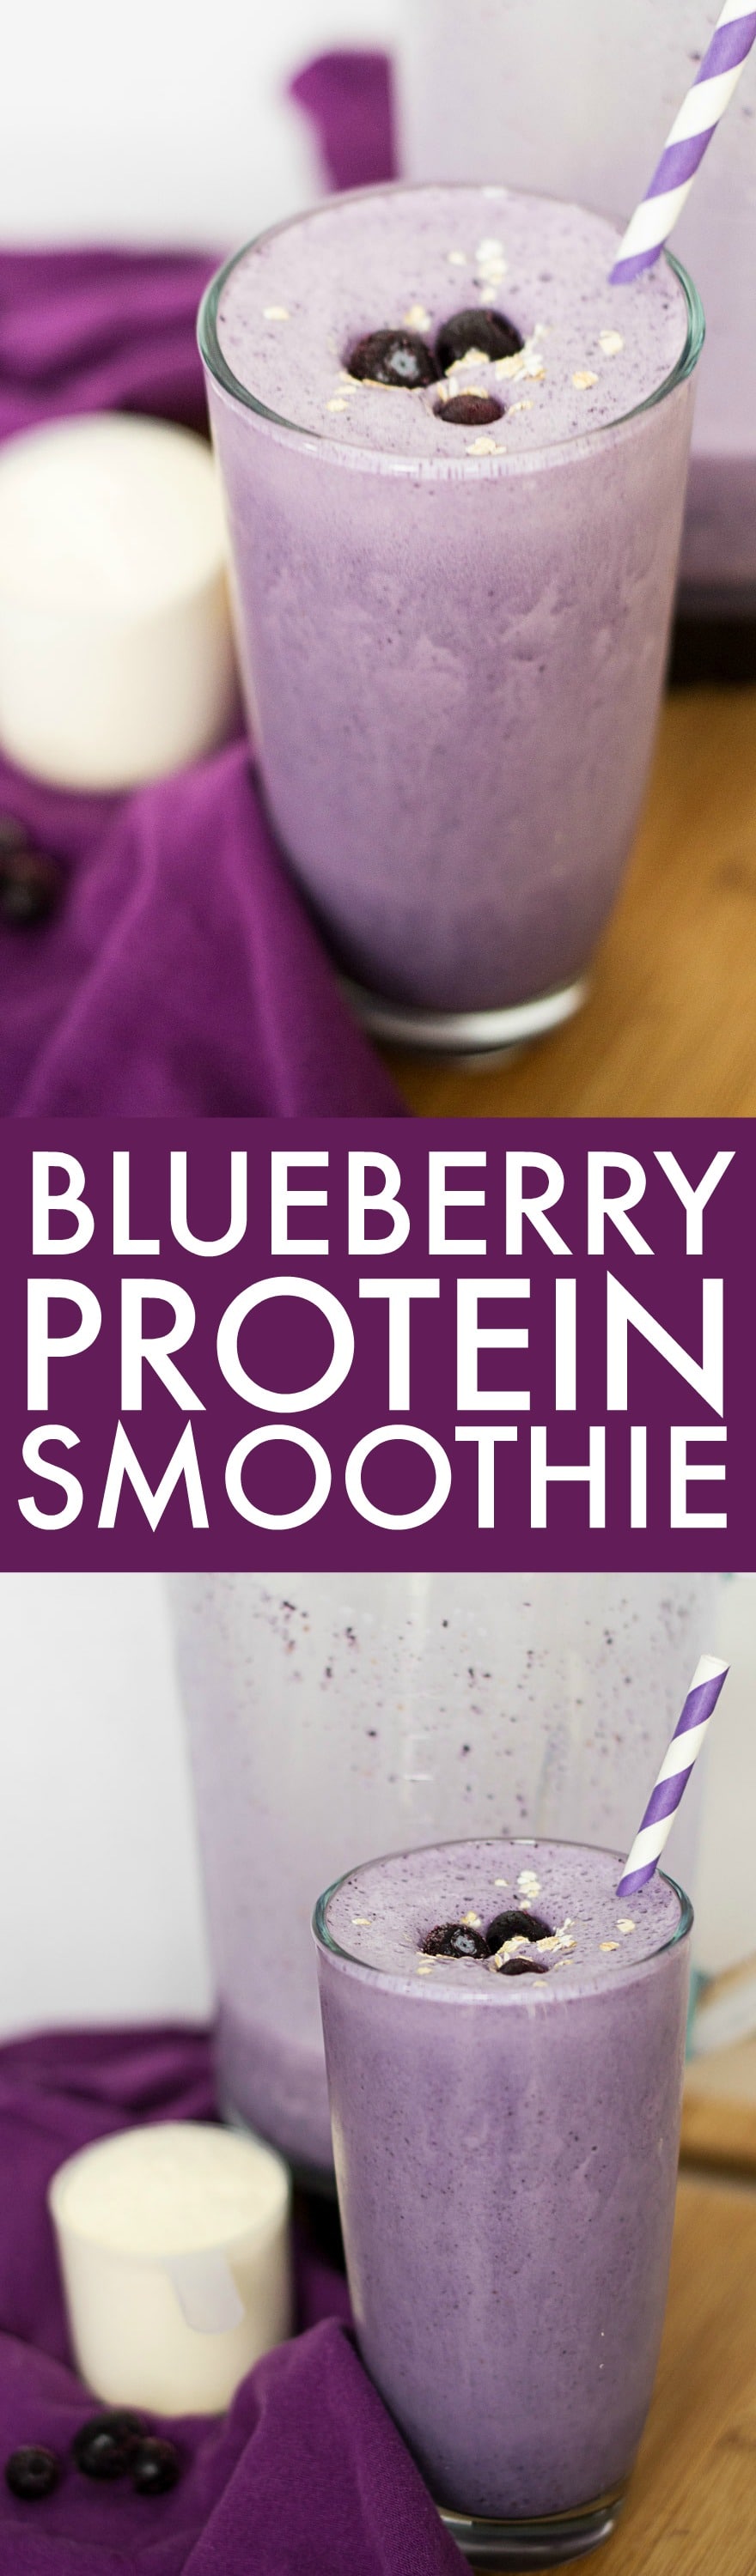 Blueberry Protein Smoothie - This smoothie recipe will give you a big kick of protein to help you recover quickly from a workout or just to add more protein to your diet! Makes a great breakfast smoothie, too!